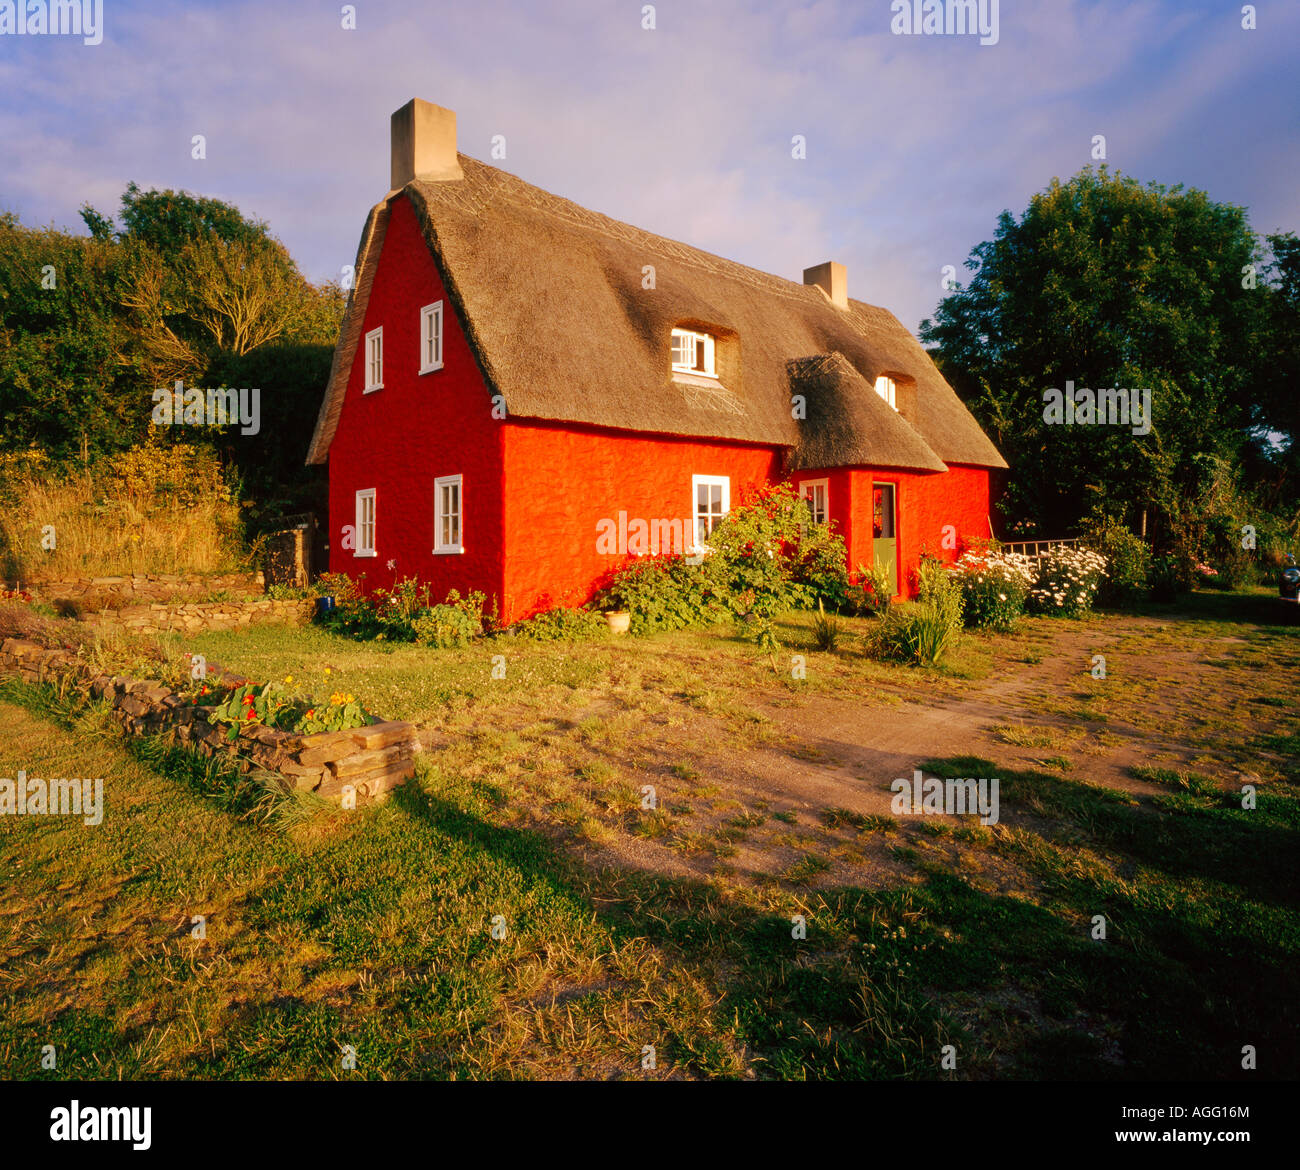 a red painted cottage with a thatched roof in a rural countryside setting Stock Photo